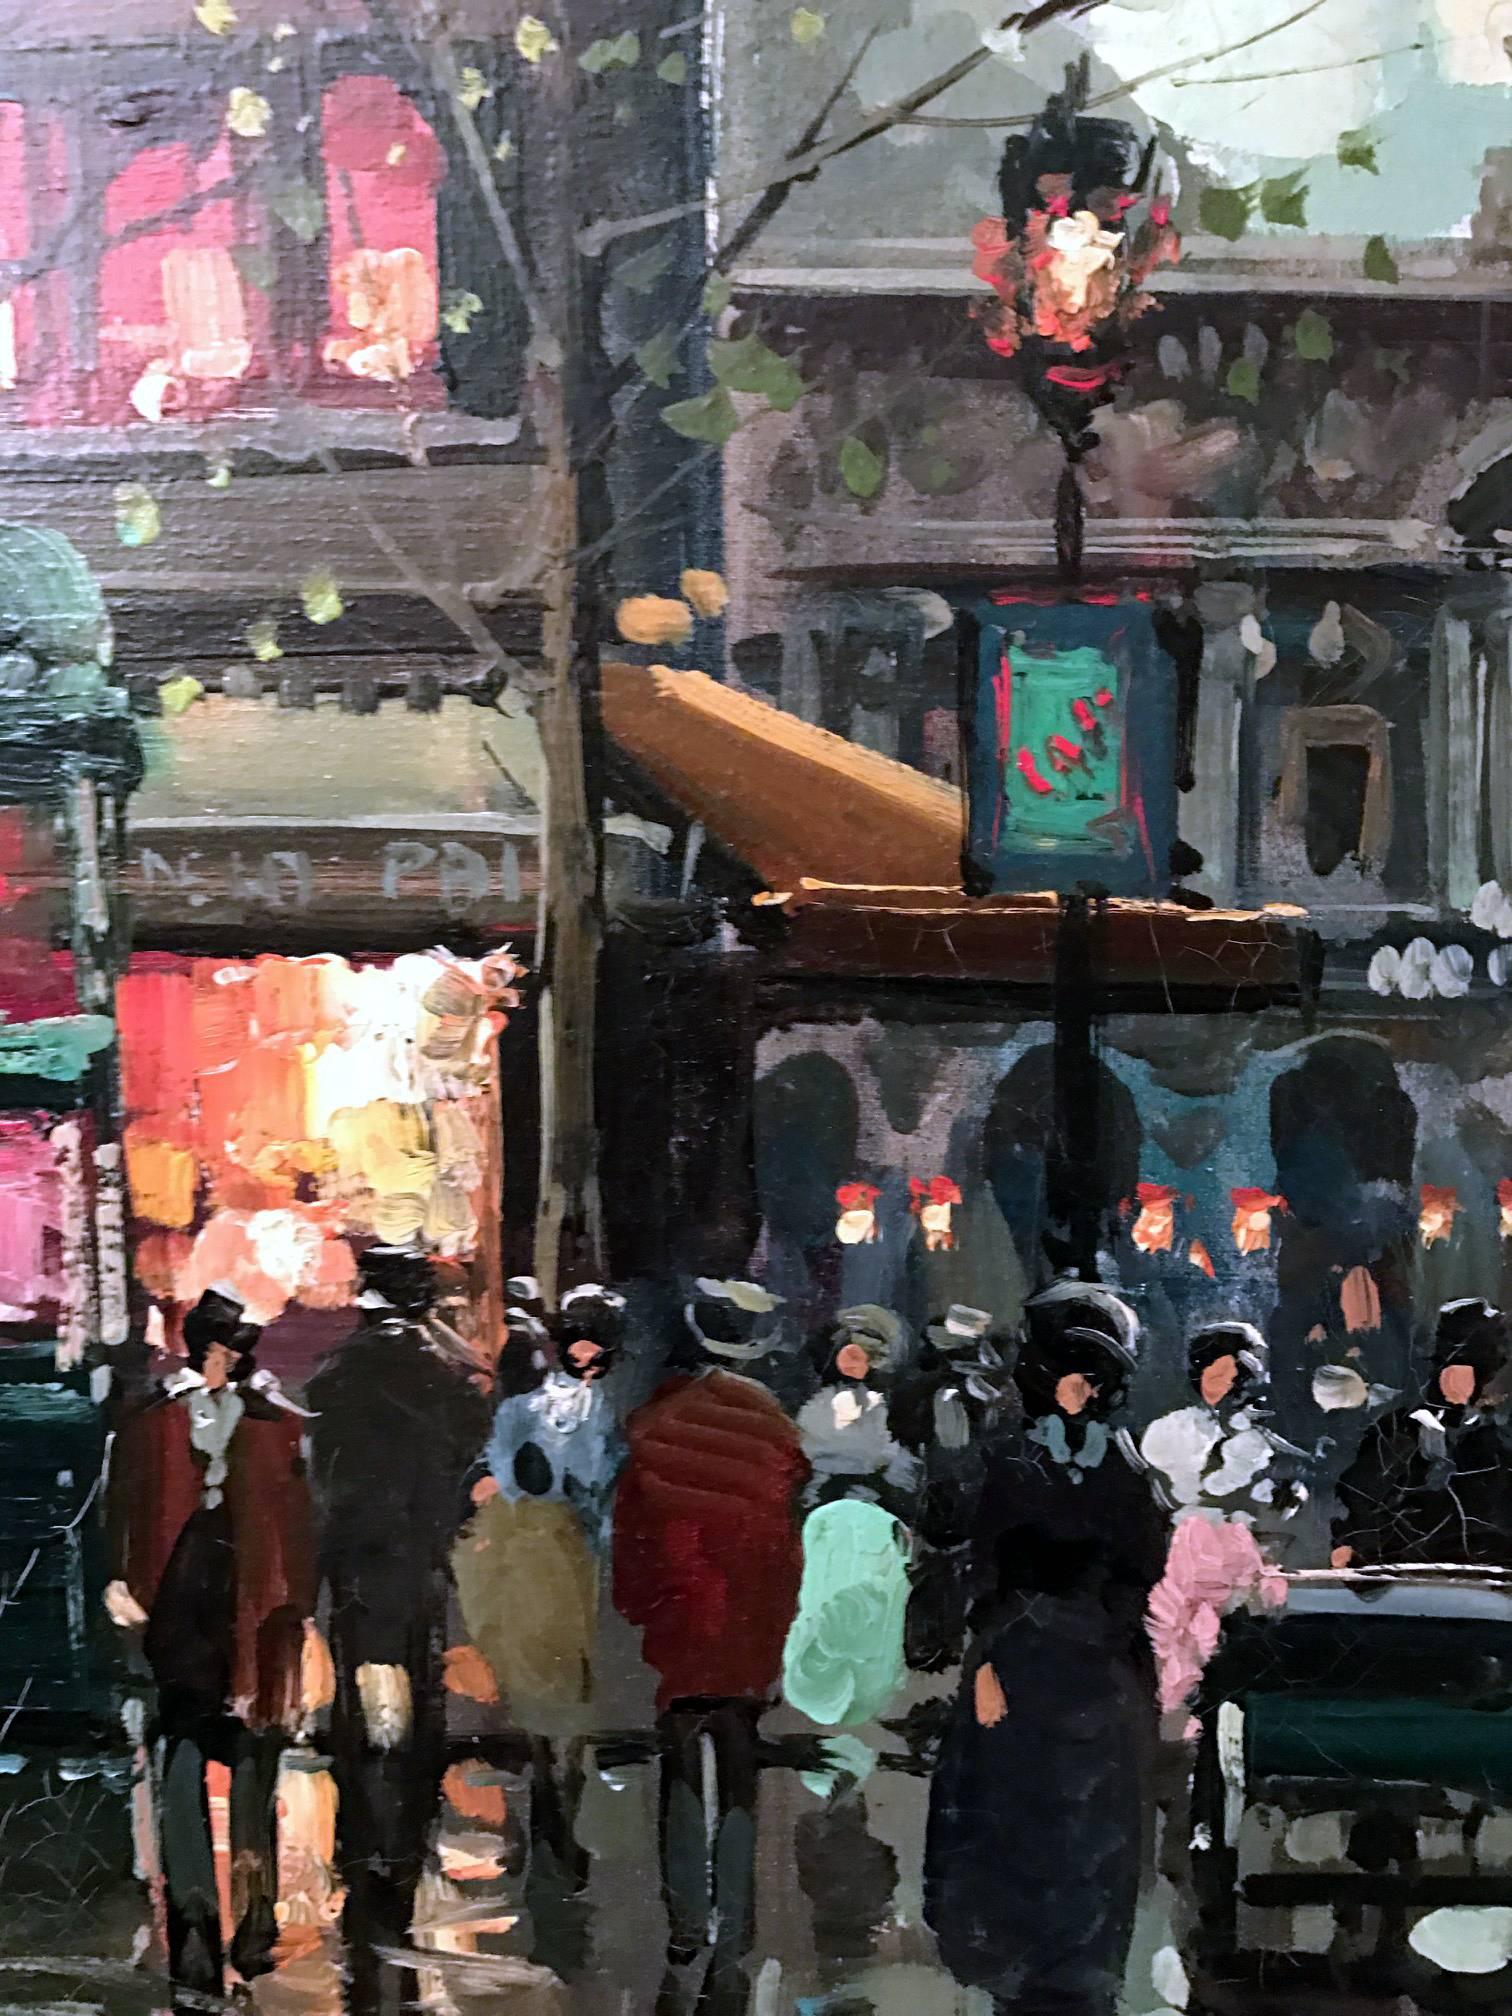 Title: Place de L'opera.
Medium: Oil on canvas.
Artist: Edouard Leon Cortes (signed)
Measurement: 20 x 24 inches.
26 x 30 with frame.
Condition: It has been preserved professionally by an art institution.
An oil painting depicting L'opera Paris in a